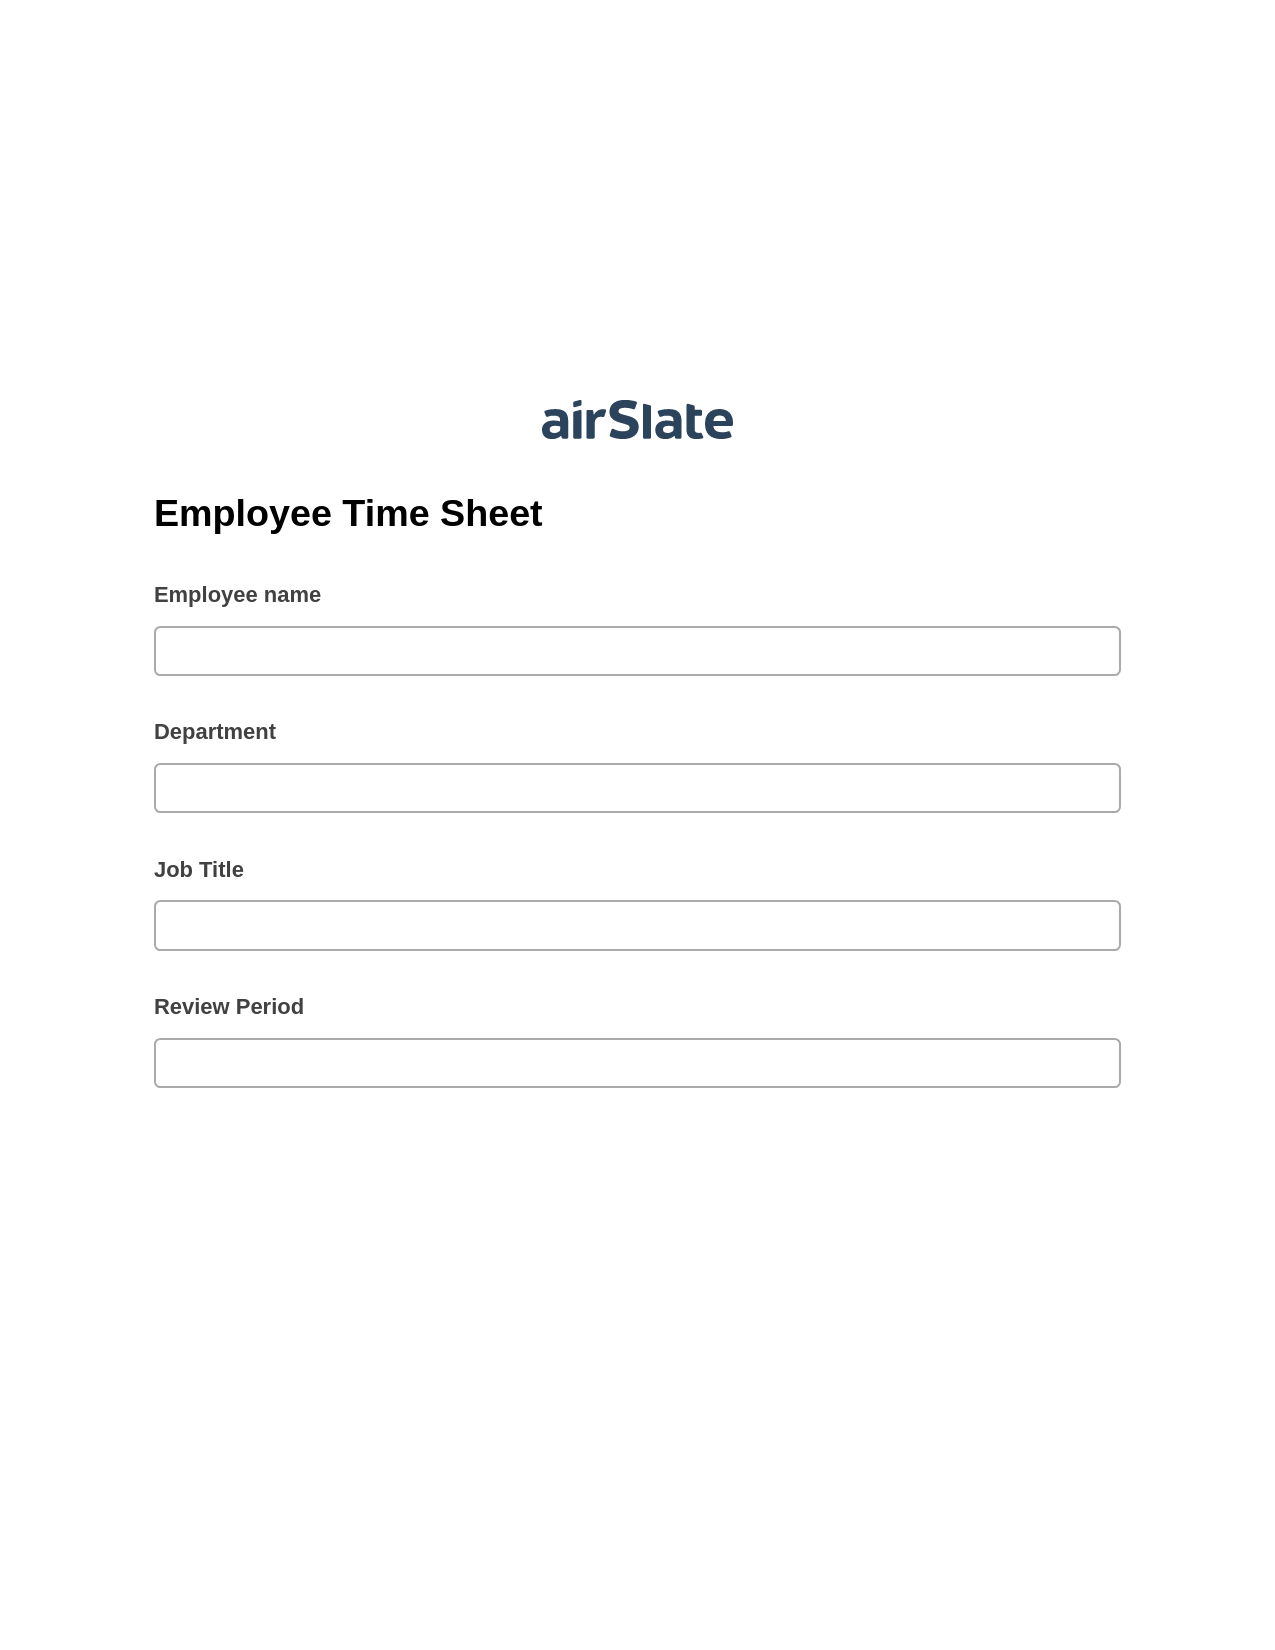 Multirole Employee Time Sheet Pre-fill Dropdowns from CSV file Bot, Create QuickBooks Invoice Bot, Archive to Dropbox Bot